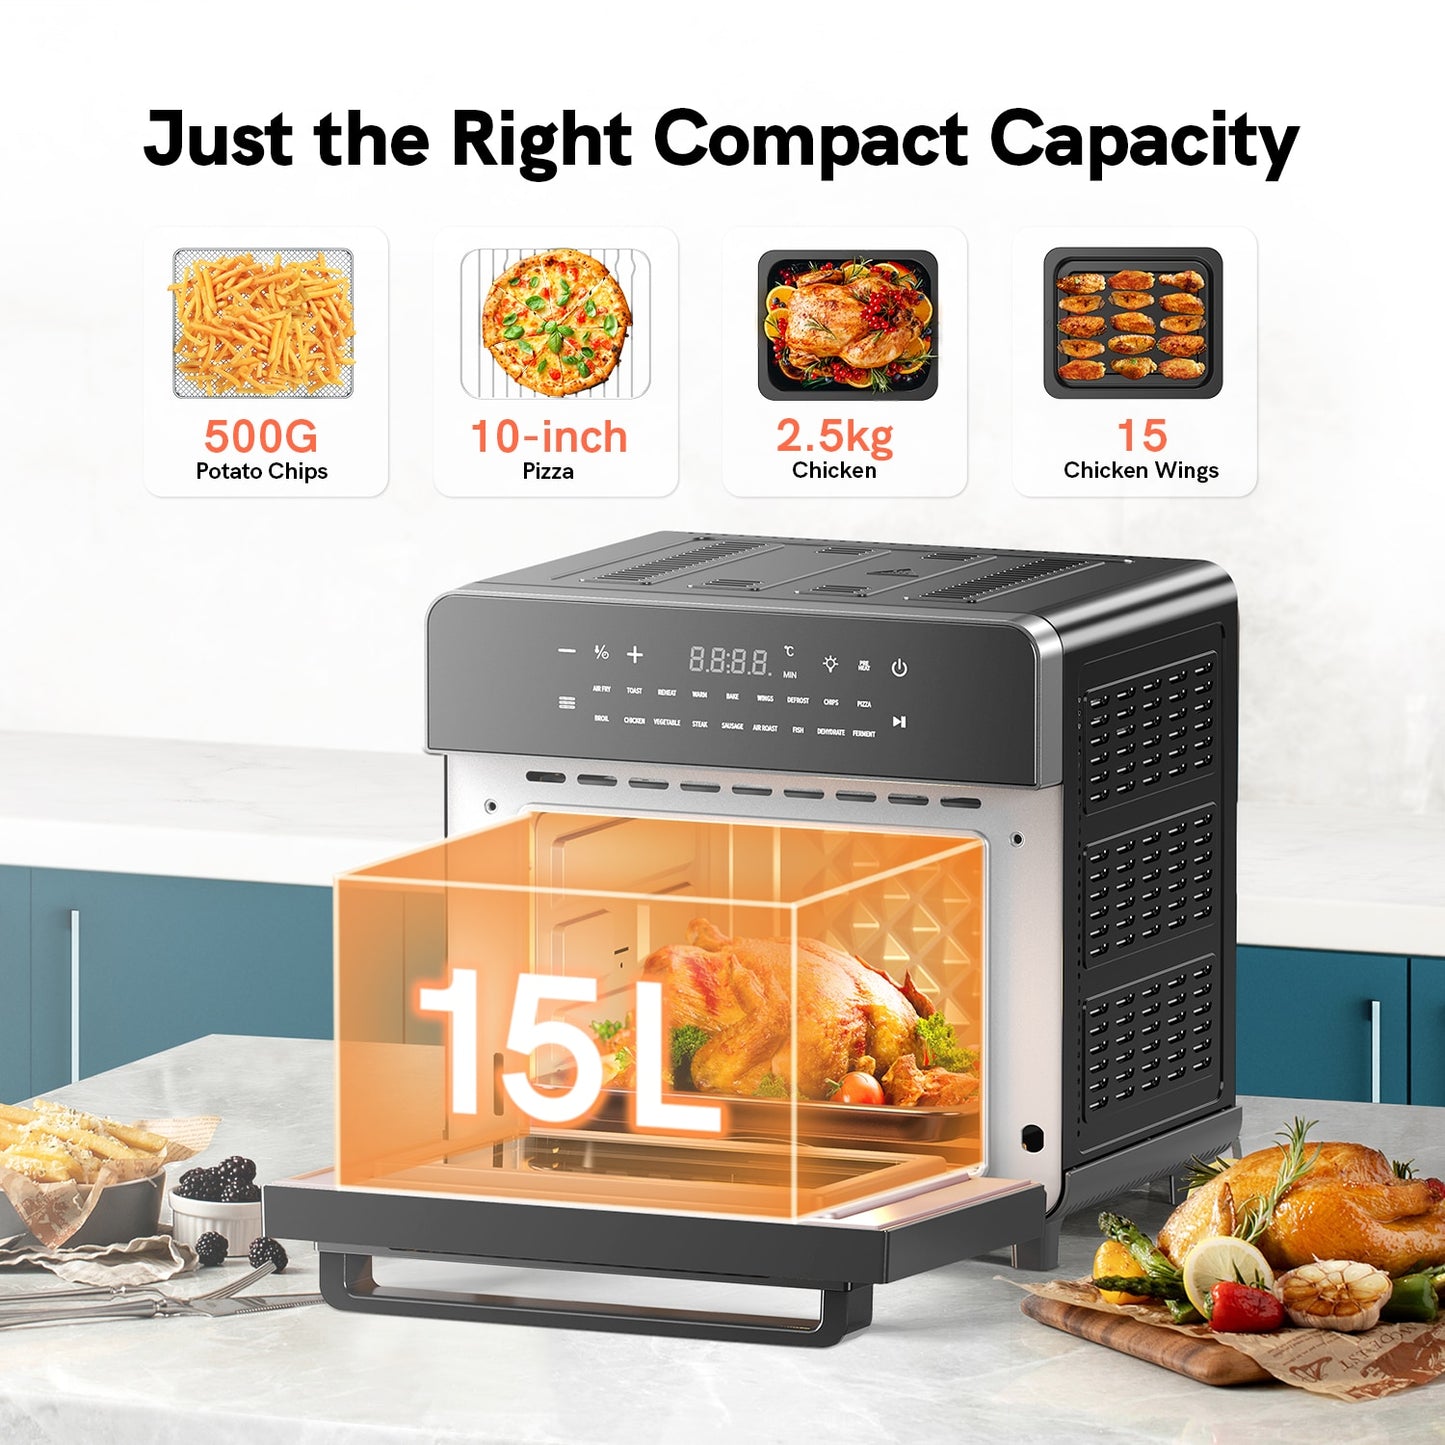 INVOLLY 15L Air Fryer Oven, Countertop Convection Mini Oven, 18 in 1 Digital Table-top Air Fryer Toaster Oven - youronestopstore23